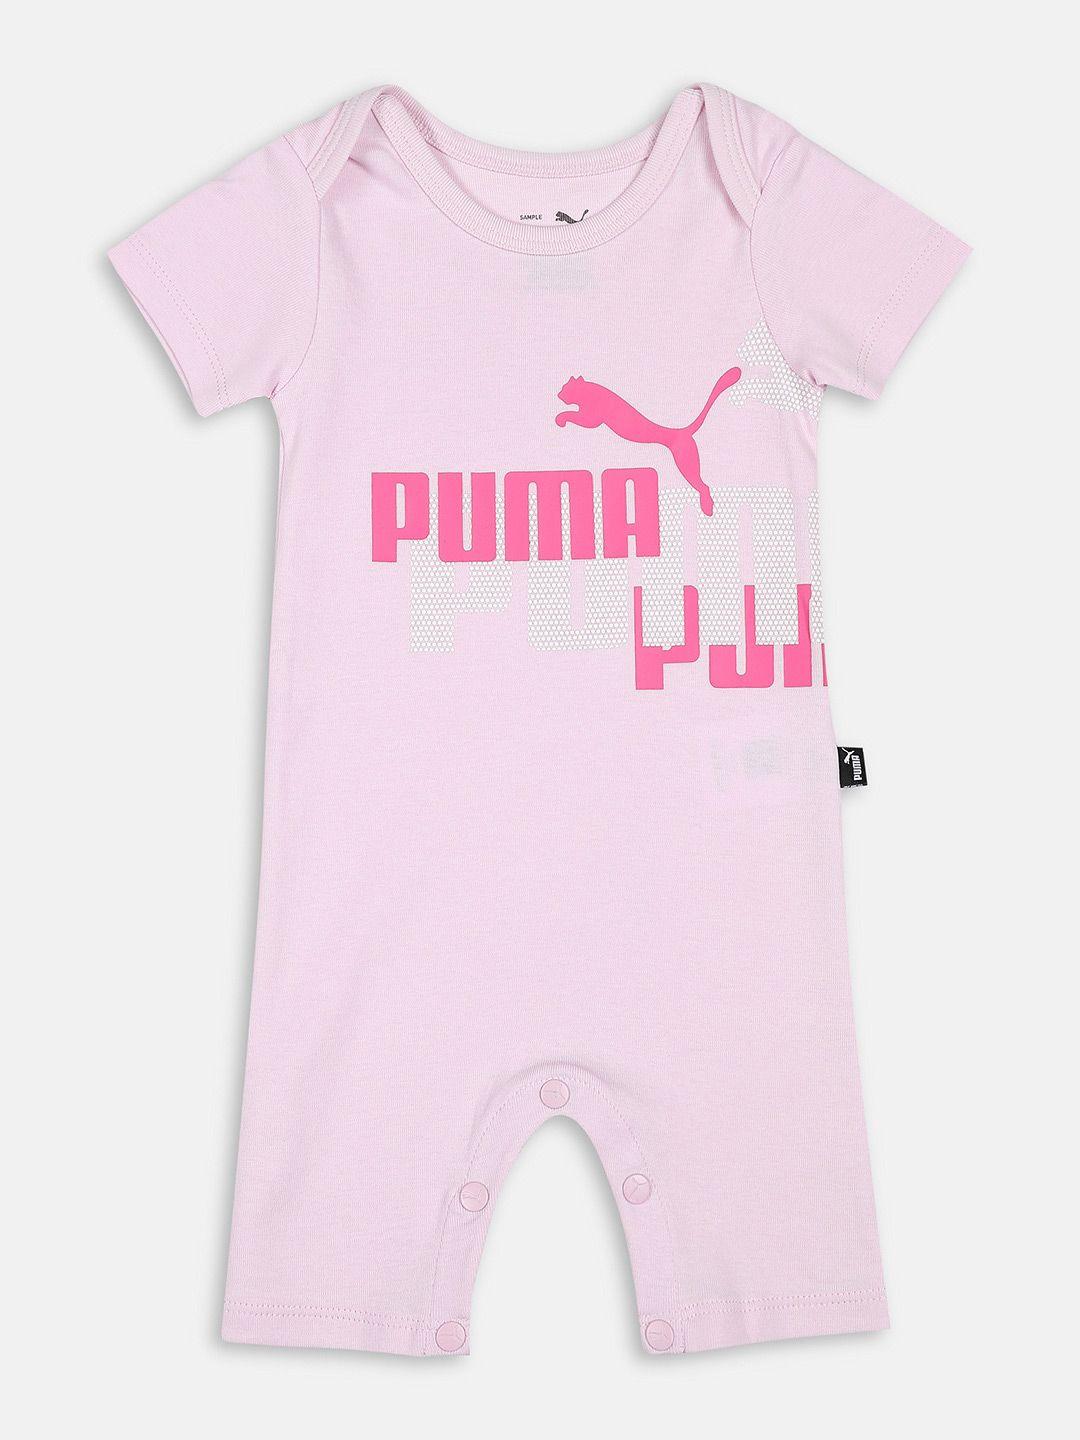 Puma Kids Brand Logo Print Minicats Newborn Oncie Overall Knitted Pure Cotton Rompers